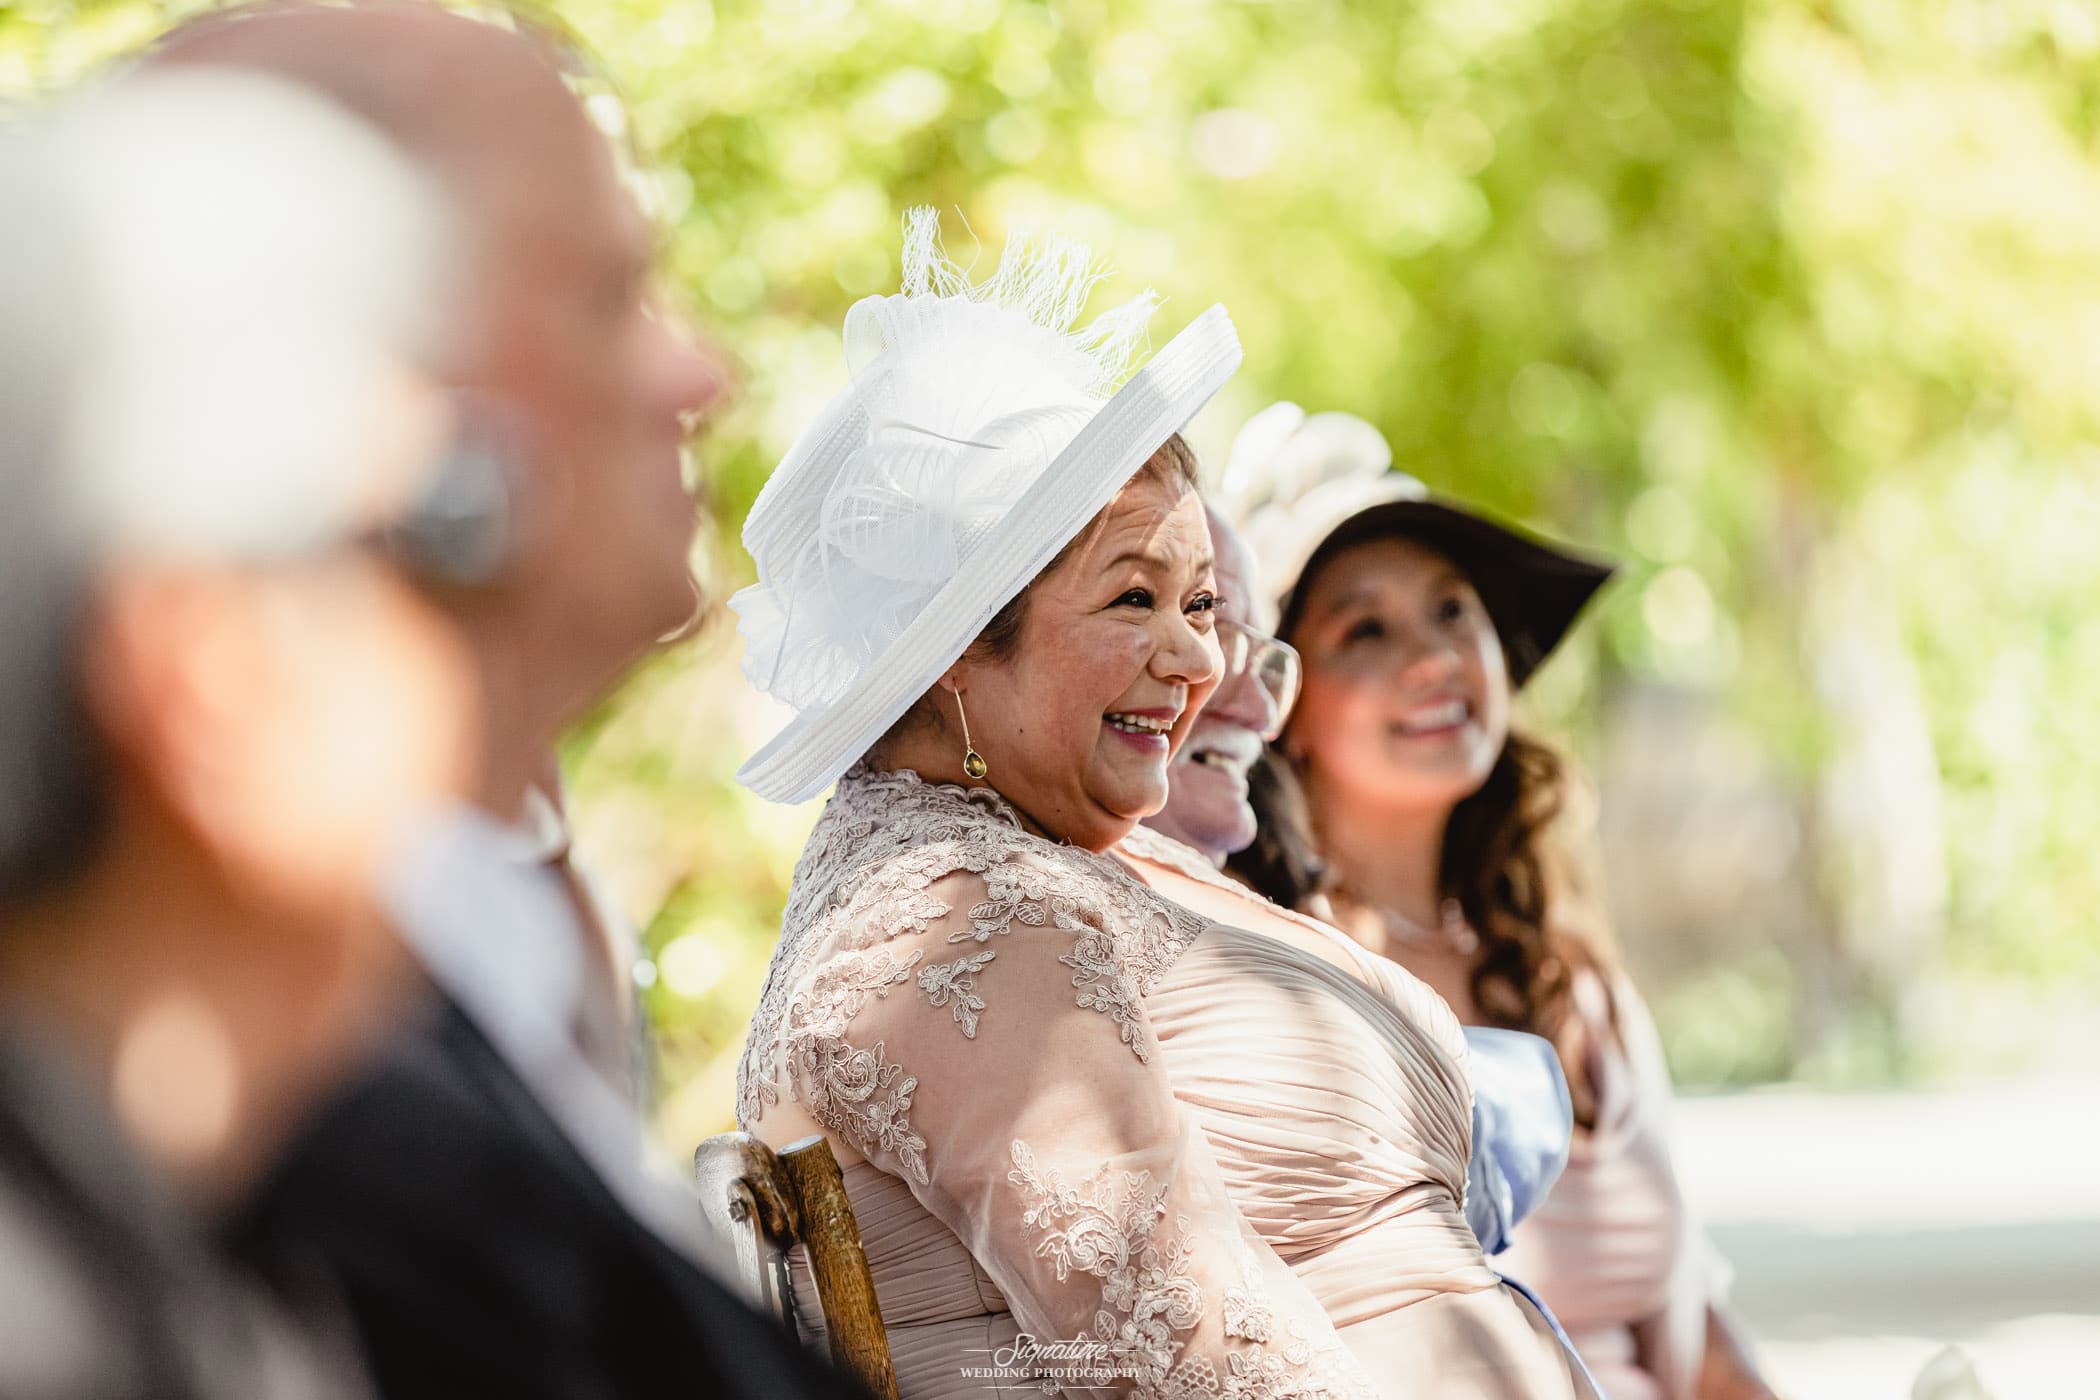 Woman in hat smiling during ceremony candid